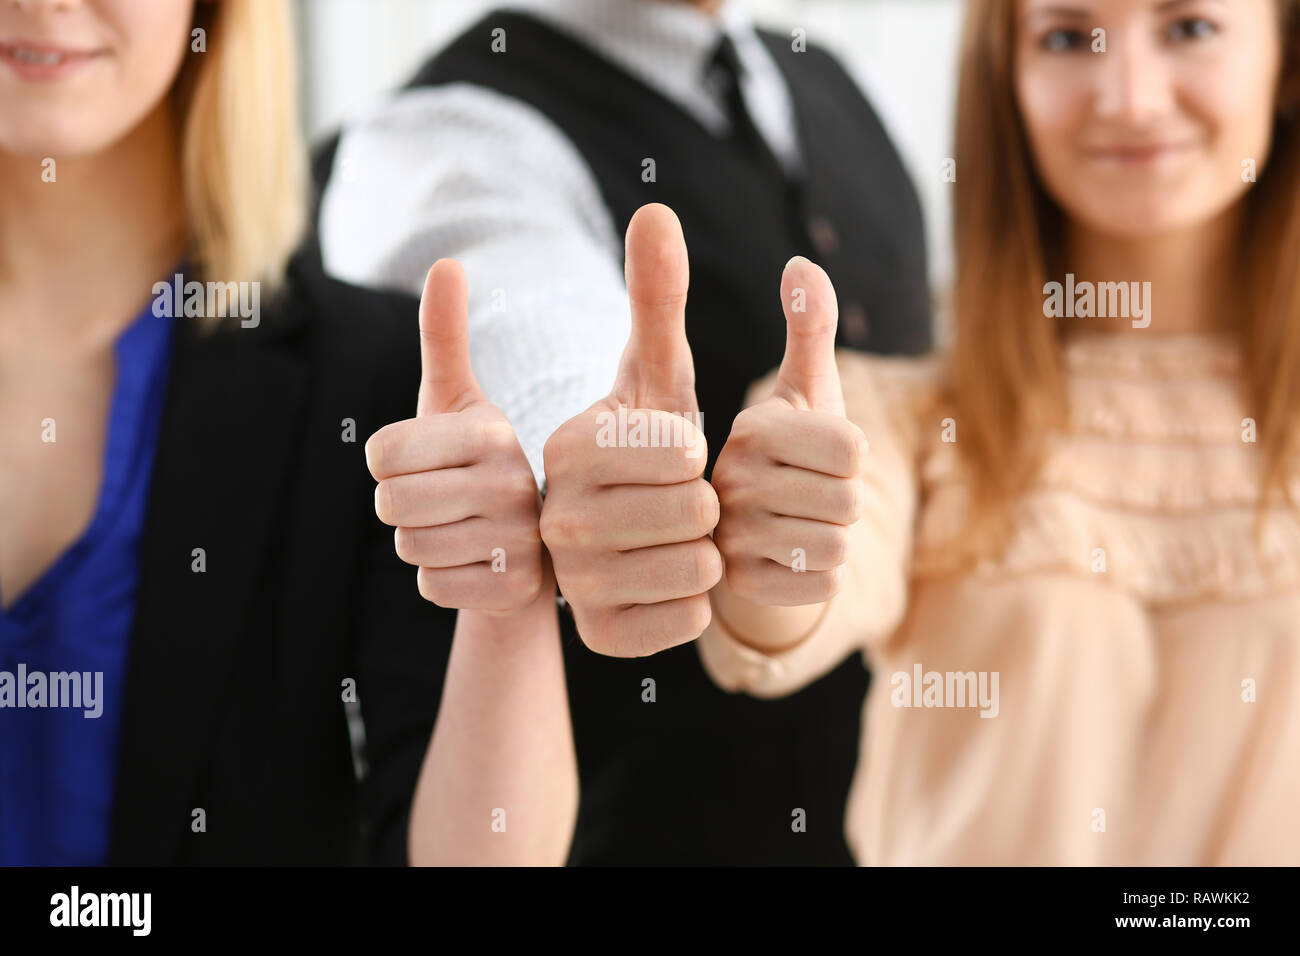 Group of people show OK or confirm with Stock Photo